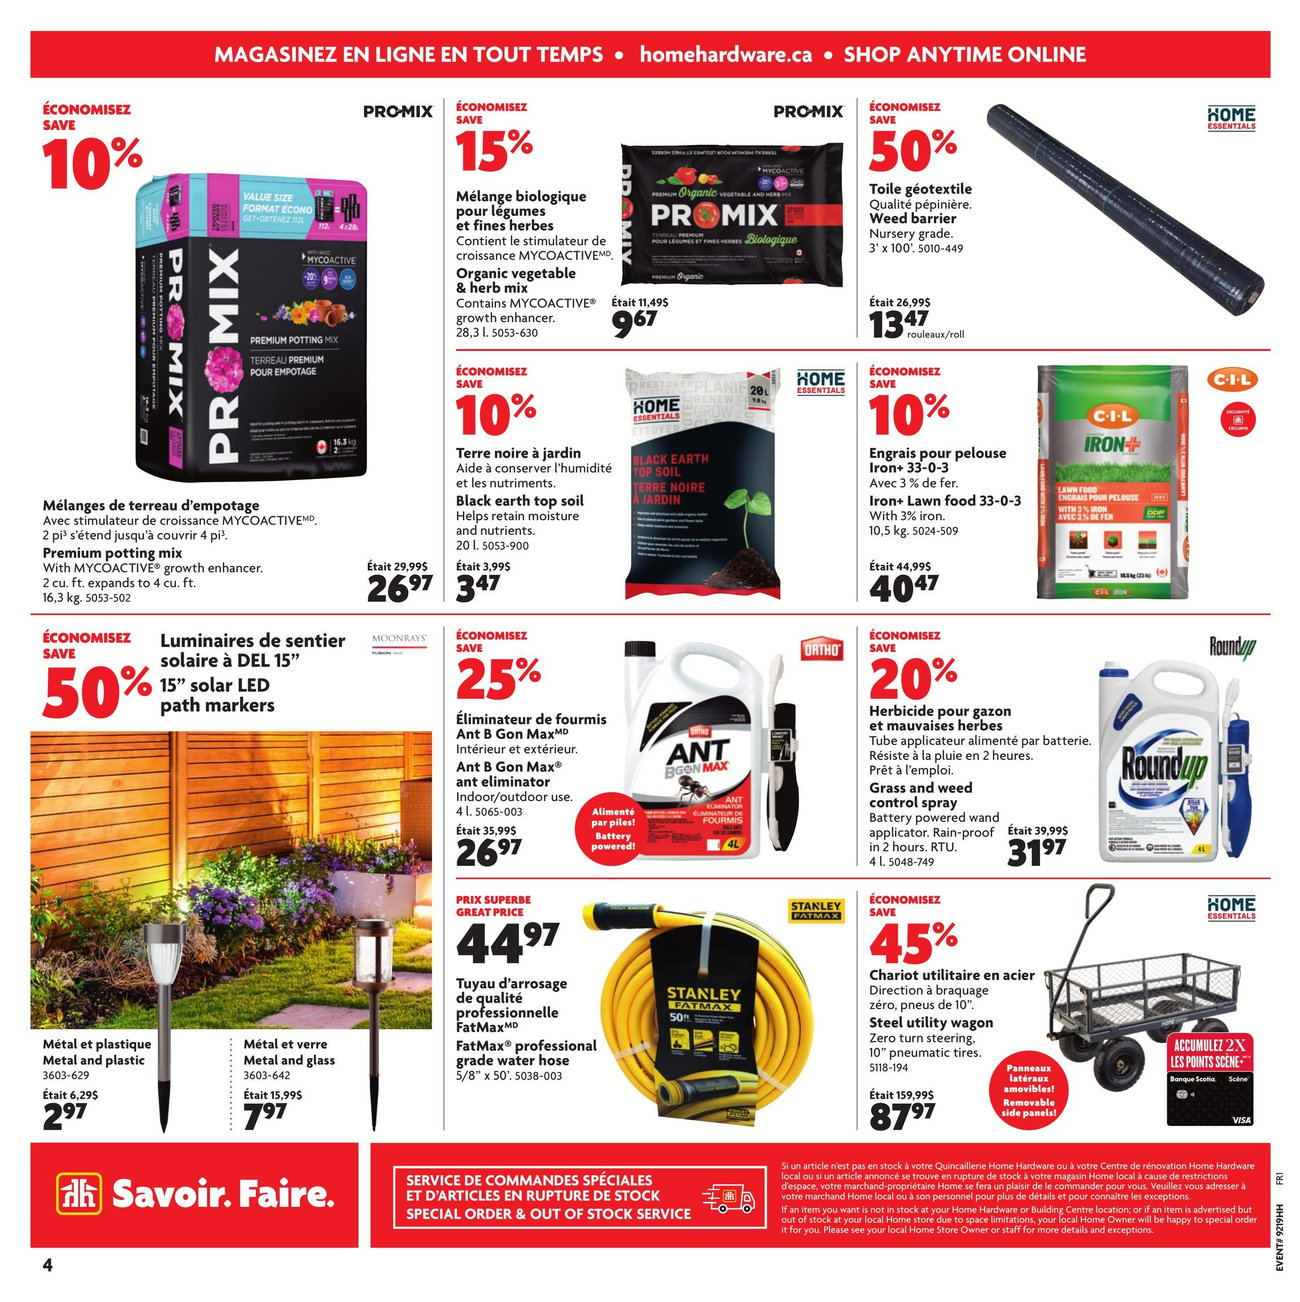 Home Hardware - Quebec - 2 Weeks of Savings - Page 6